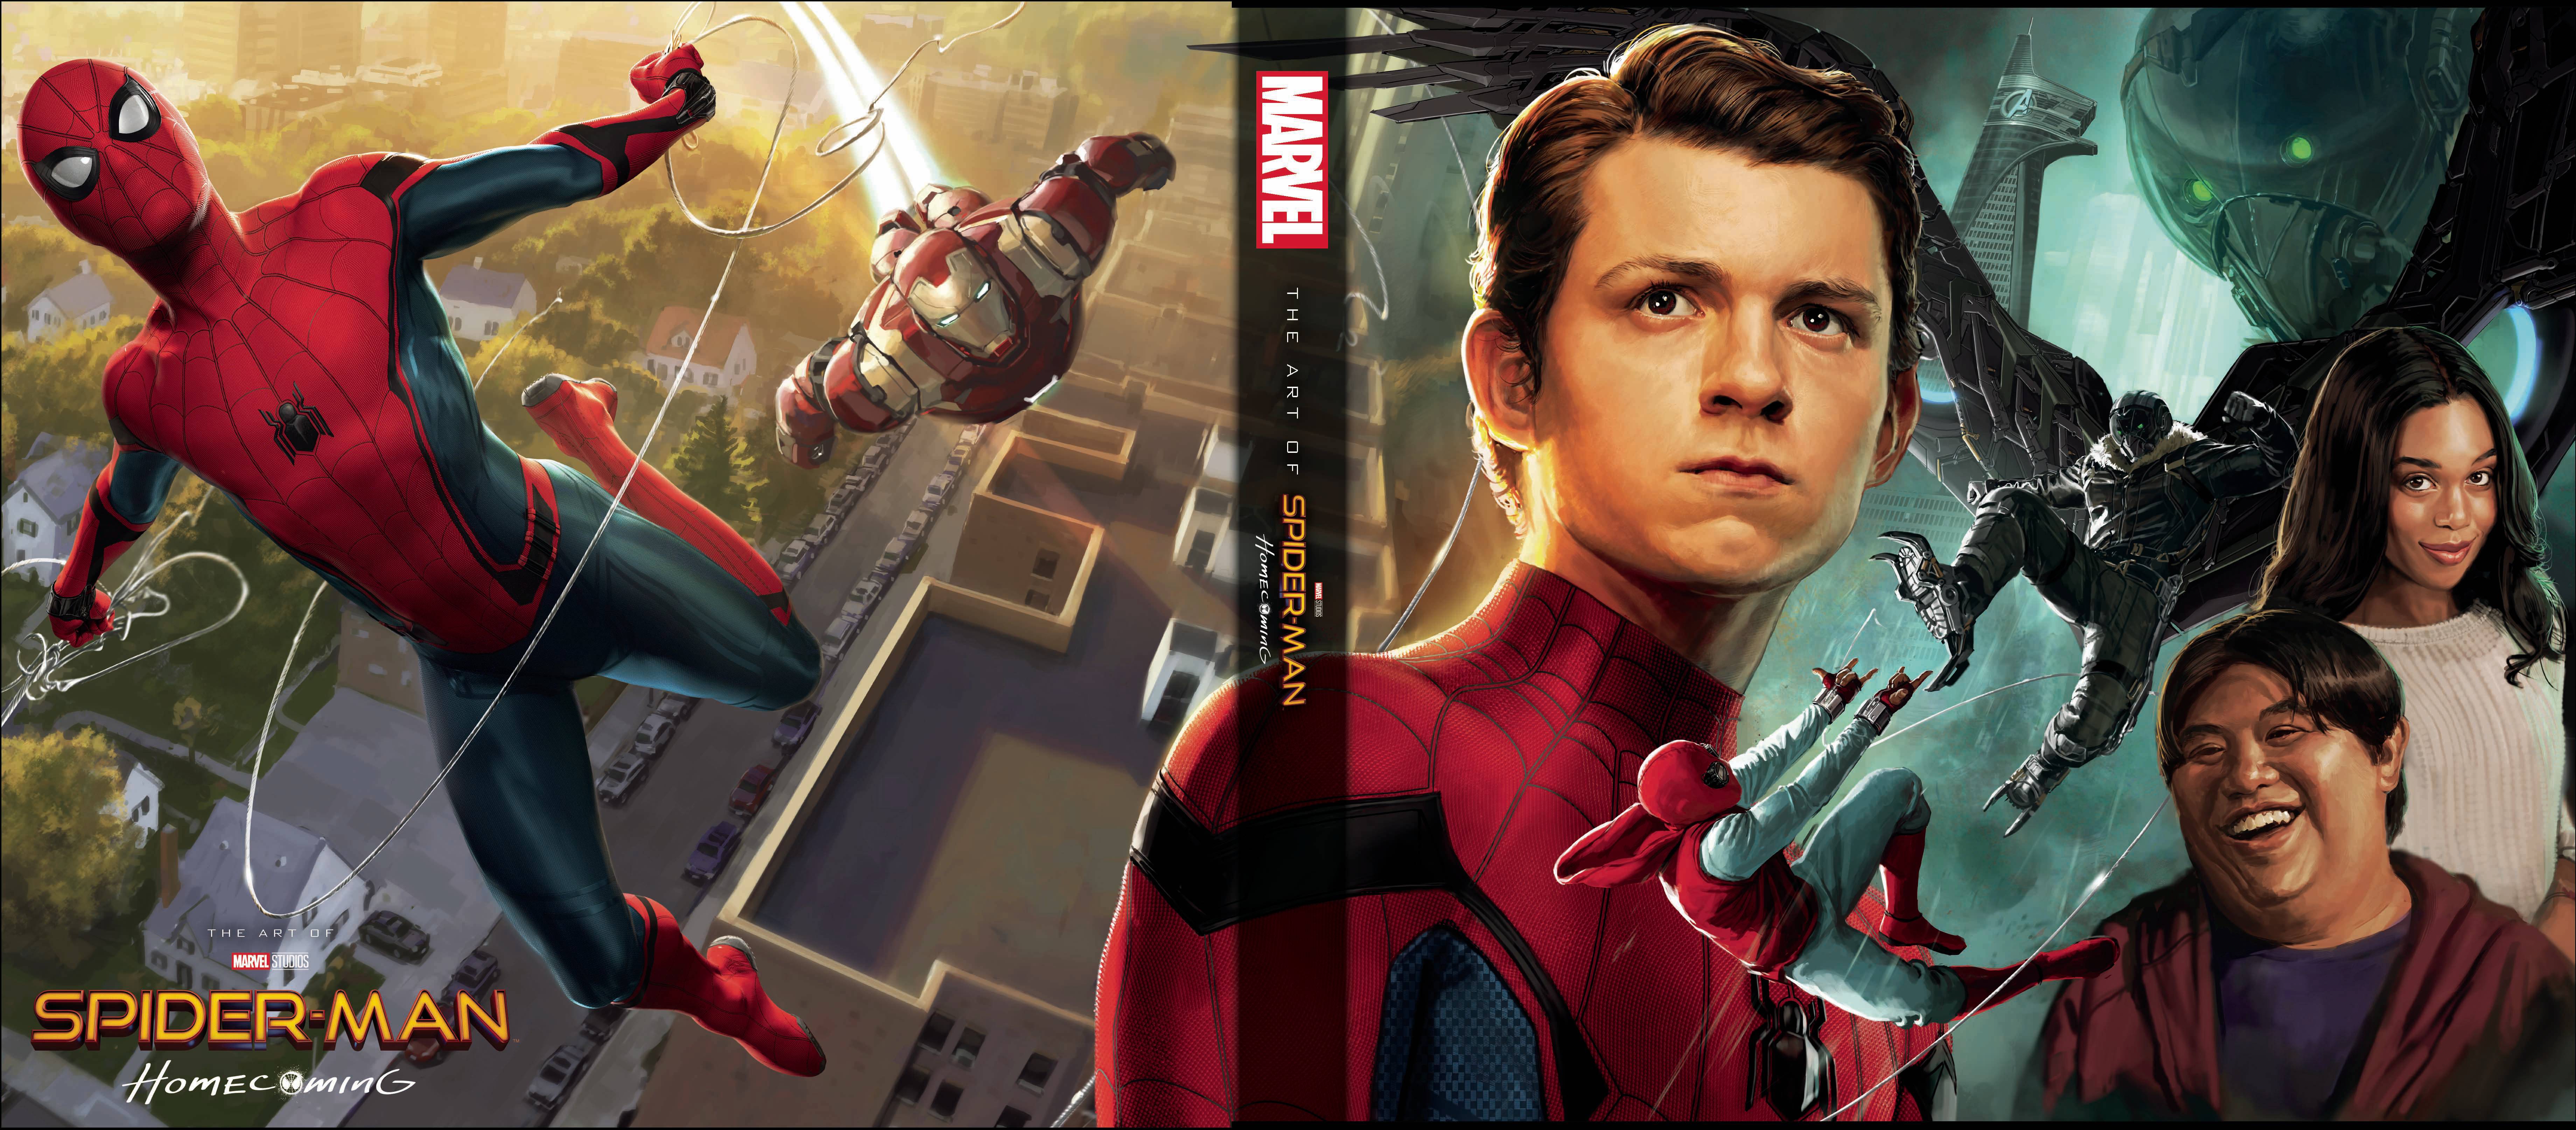 The Art of the Movie Spider-Man Homecoming